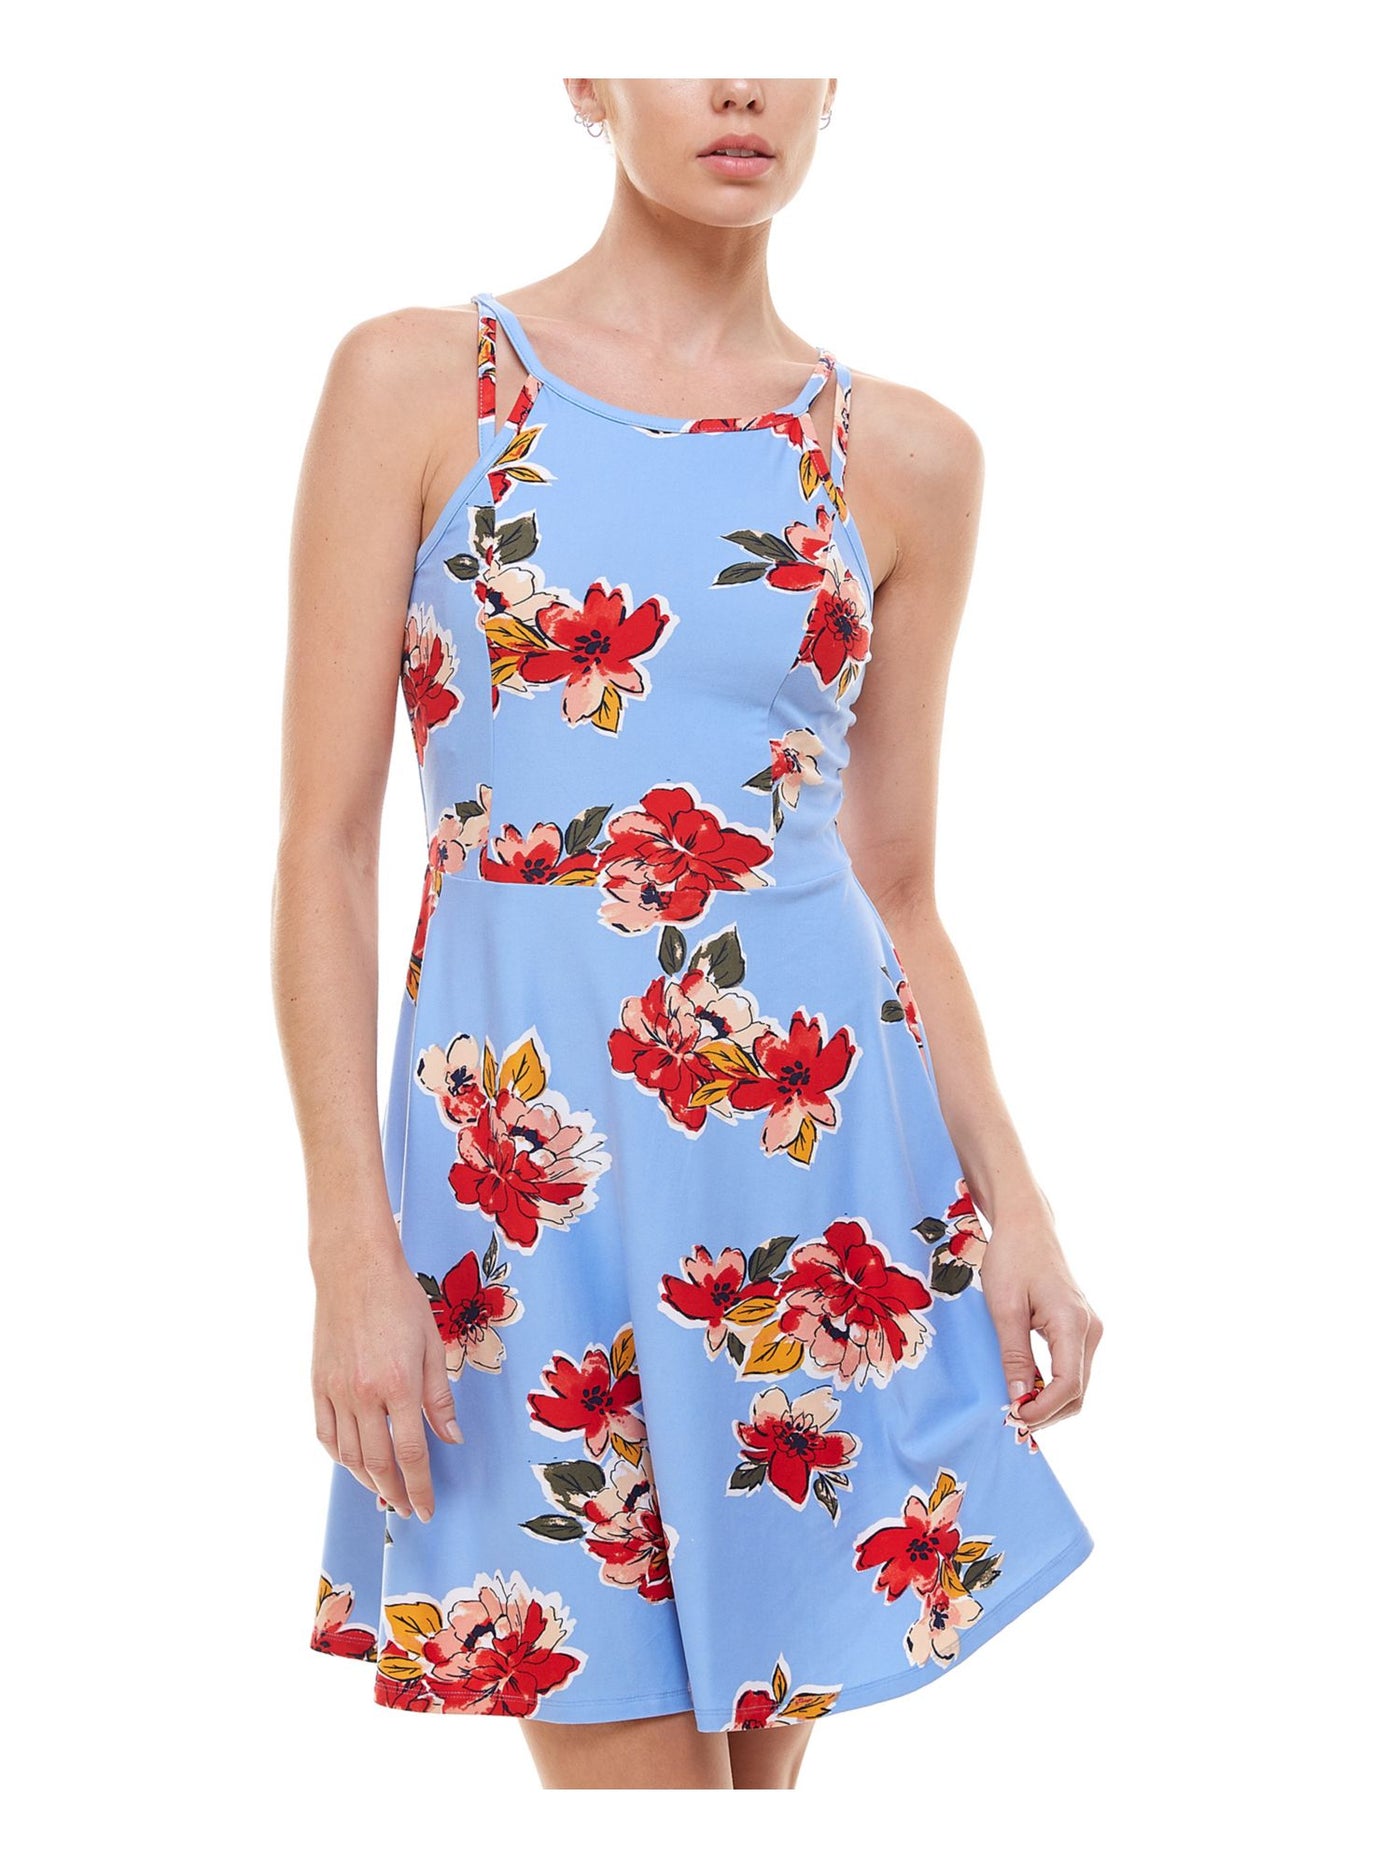 PLANET GOLD Womens Light Blue Stretch Floral Sleeveless Scoop Neck Above The Knee Party Fit + Flare Dress Juniors S